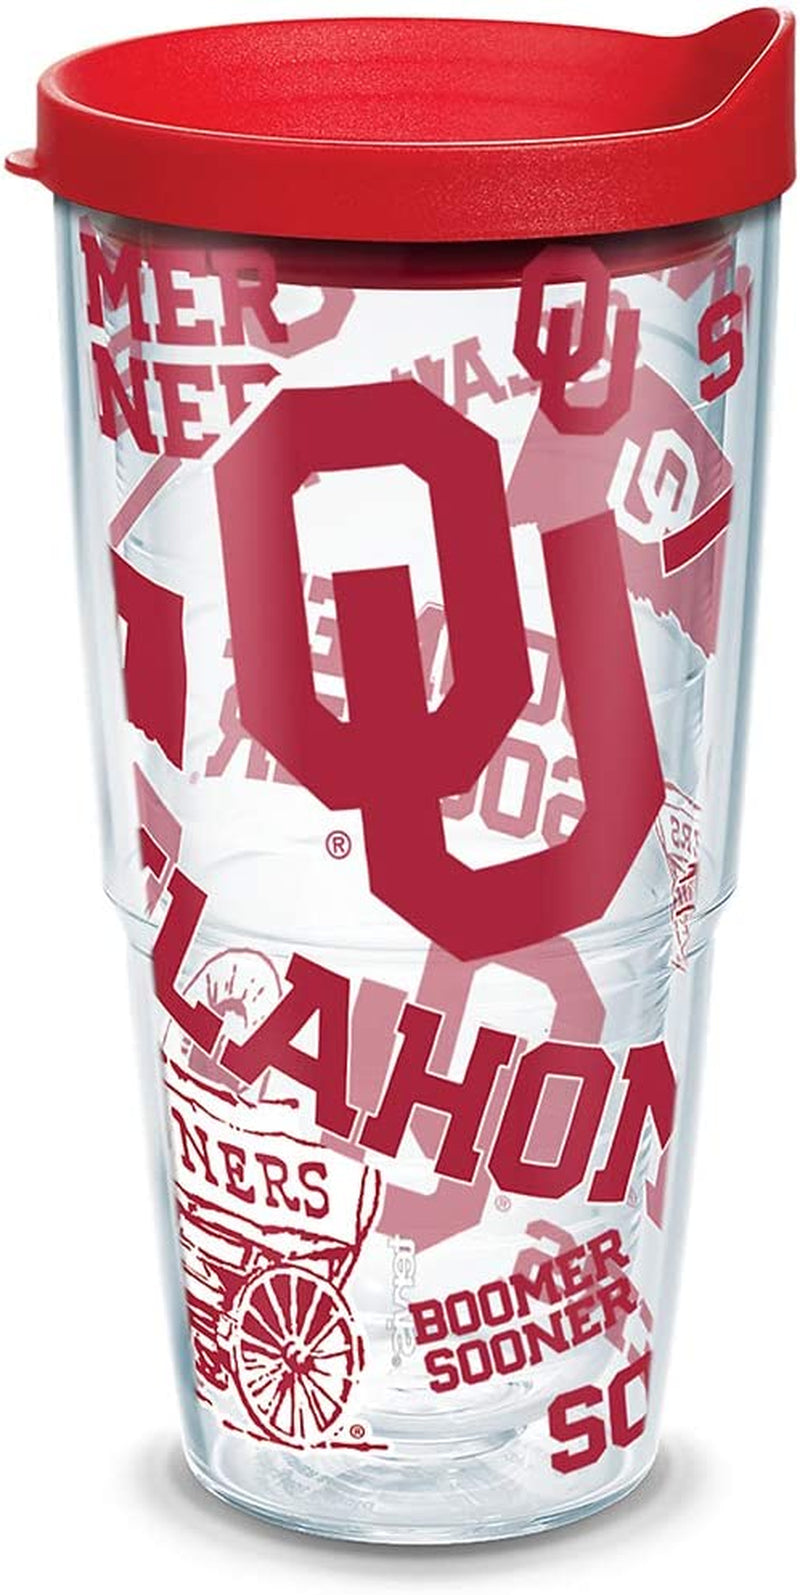 Tervis Made in USA Double Walled University of Oklahoma Sooners Insulated Tumbler Cup Keeps Drinks Cold & Hot, 24Oz, All Over Home & Garden > Kitchen & Dining > Tableware > Drinkware Tervis All Over 24 oz 